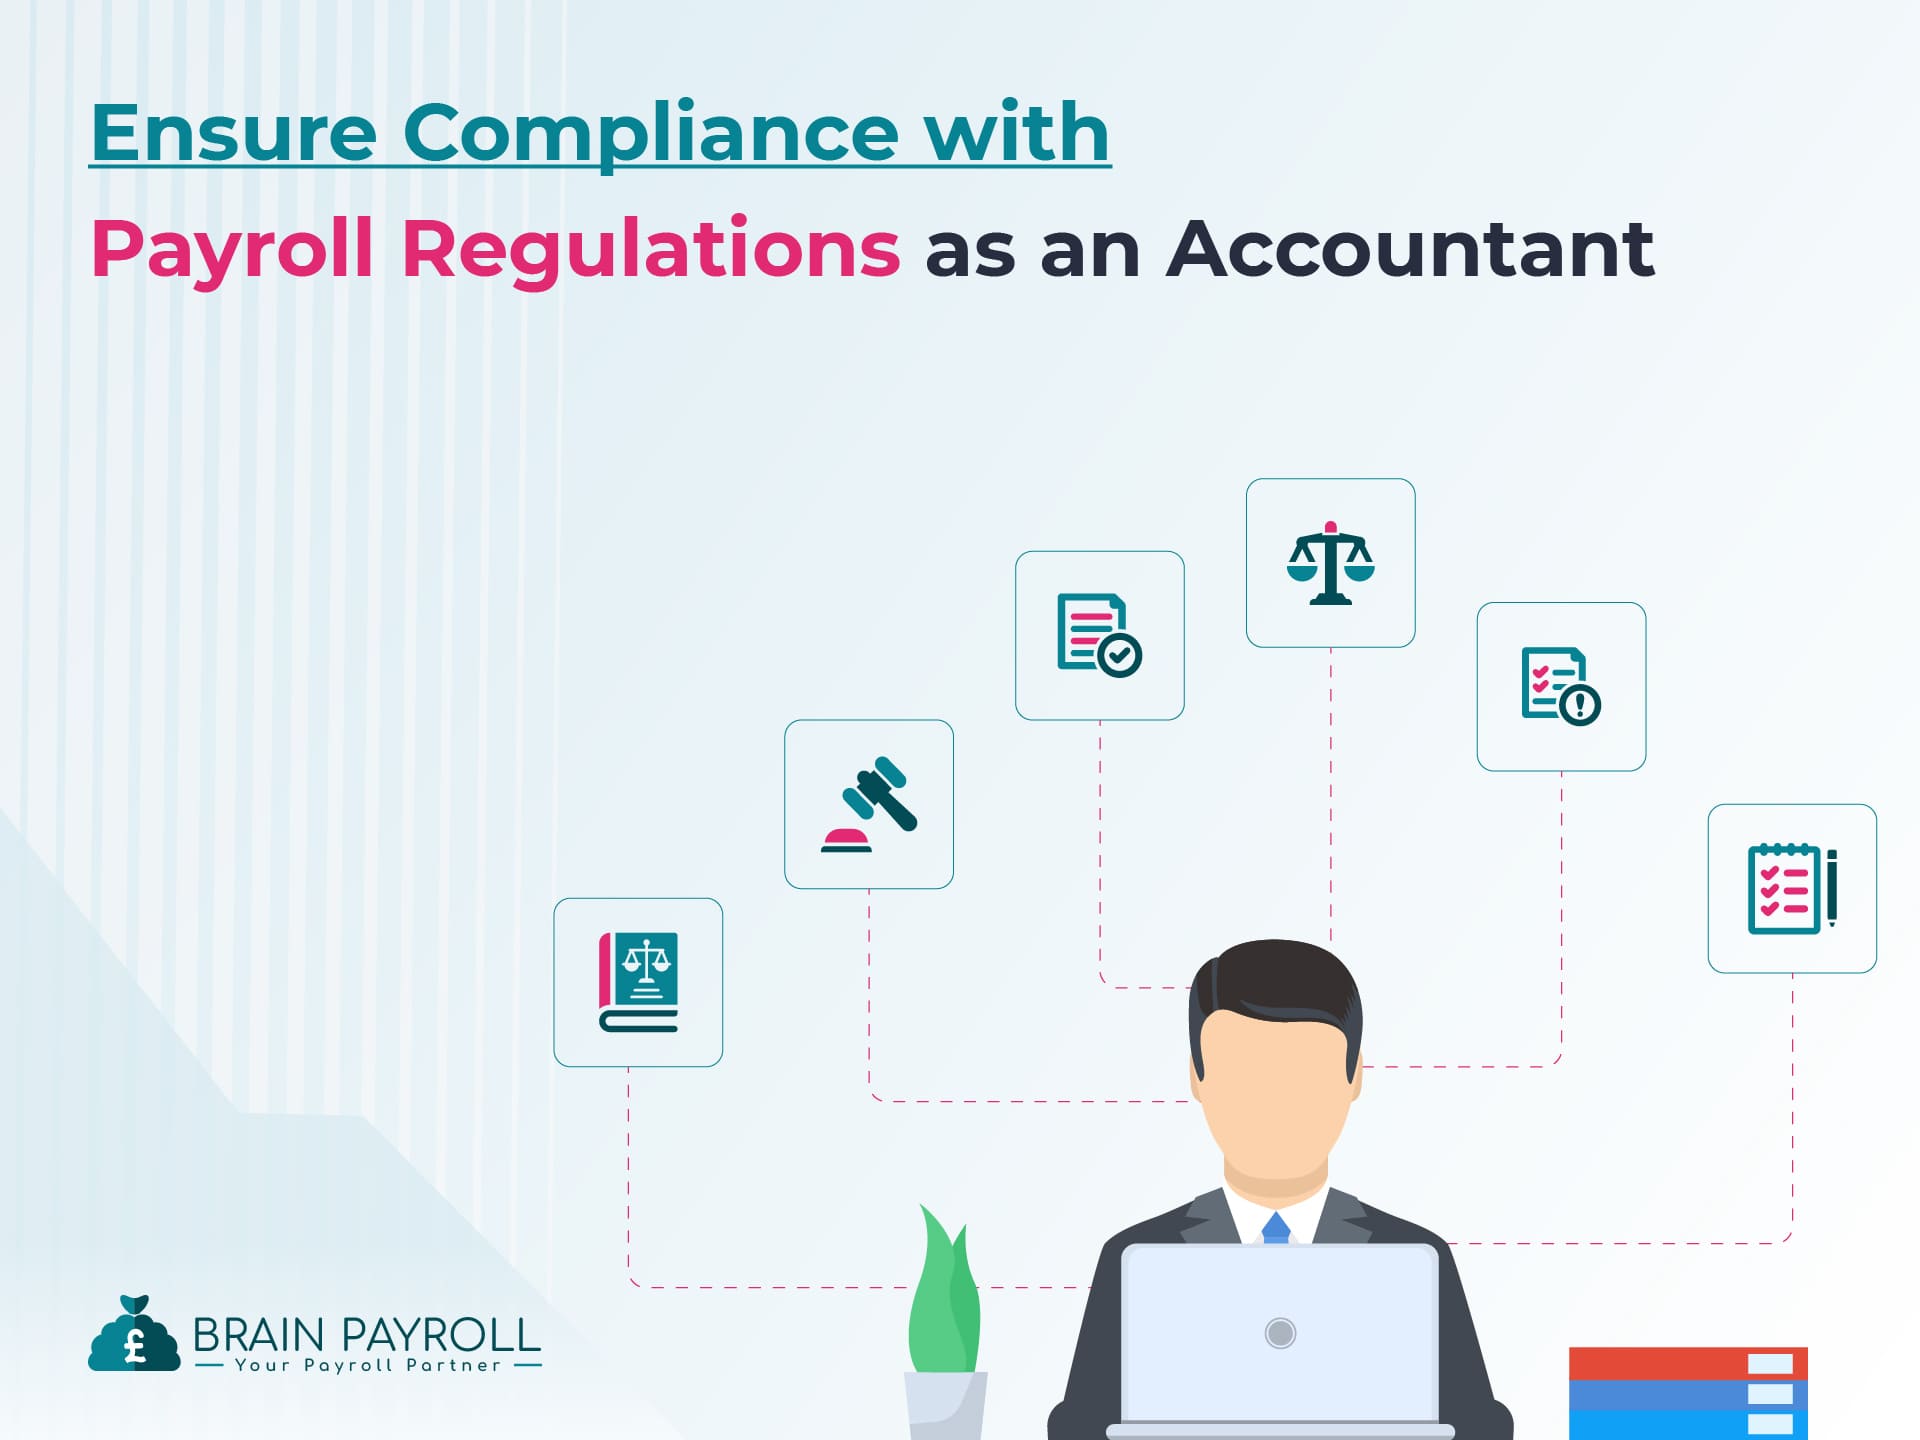 How to Ensure Compliance with Payroll Regulations as an Accountant